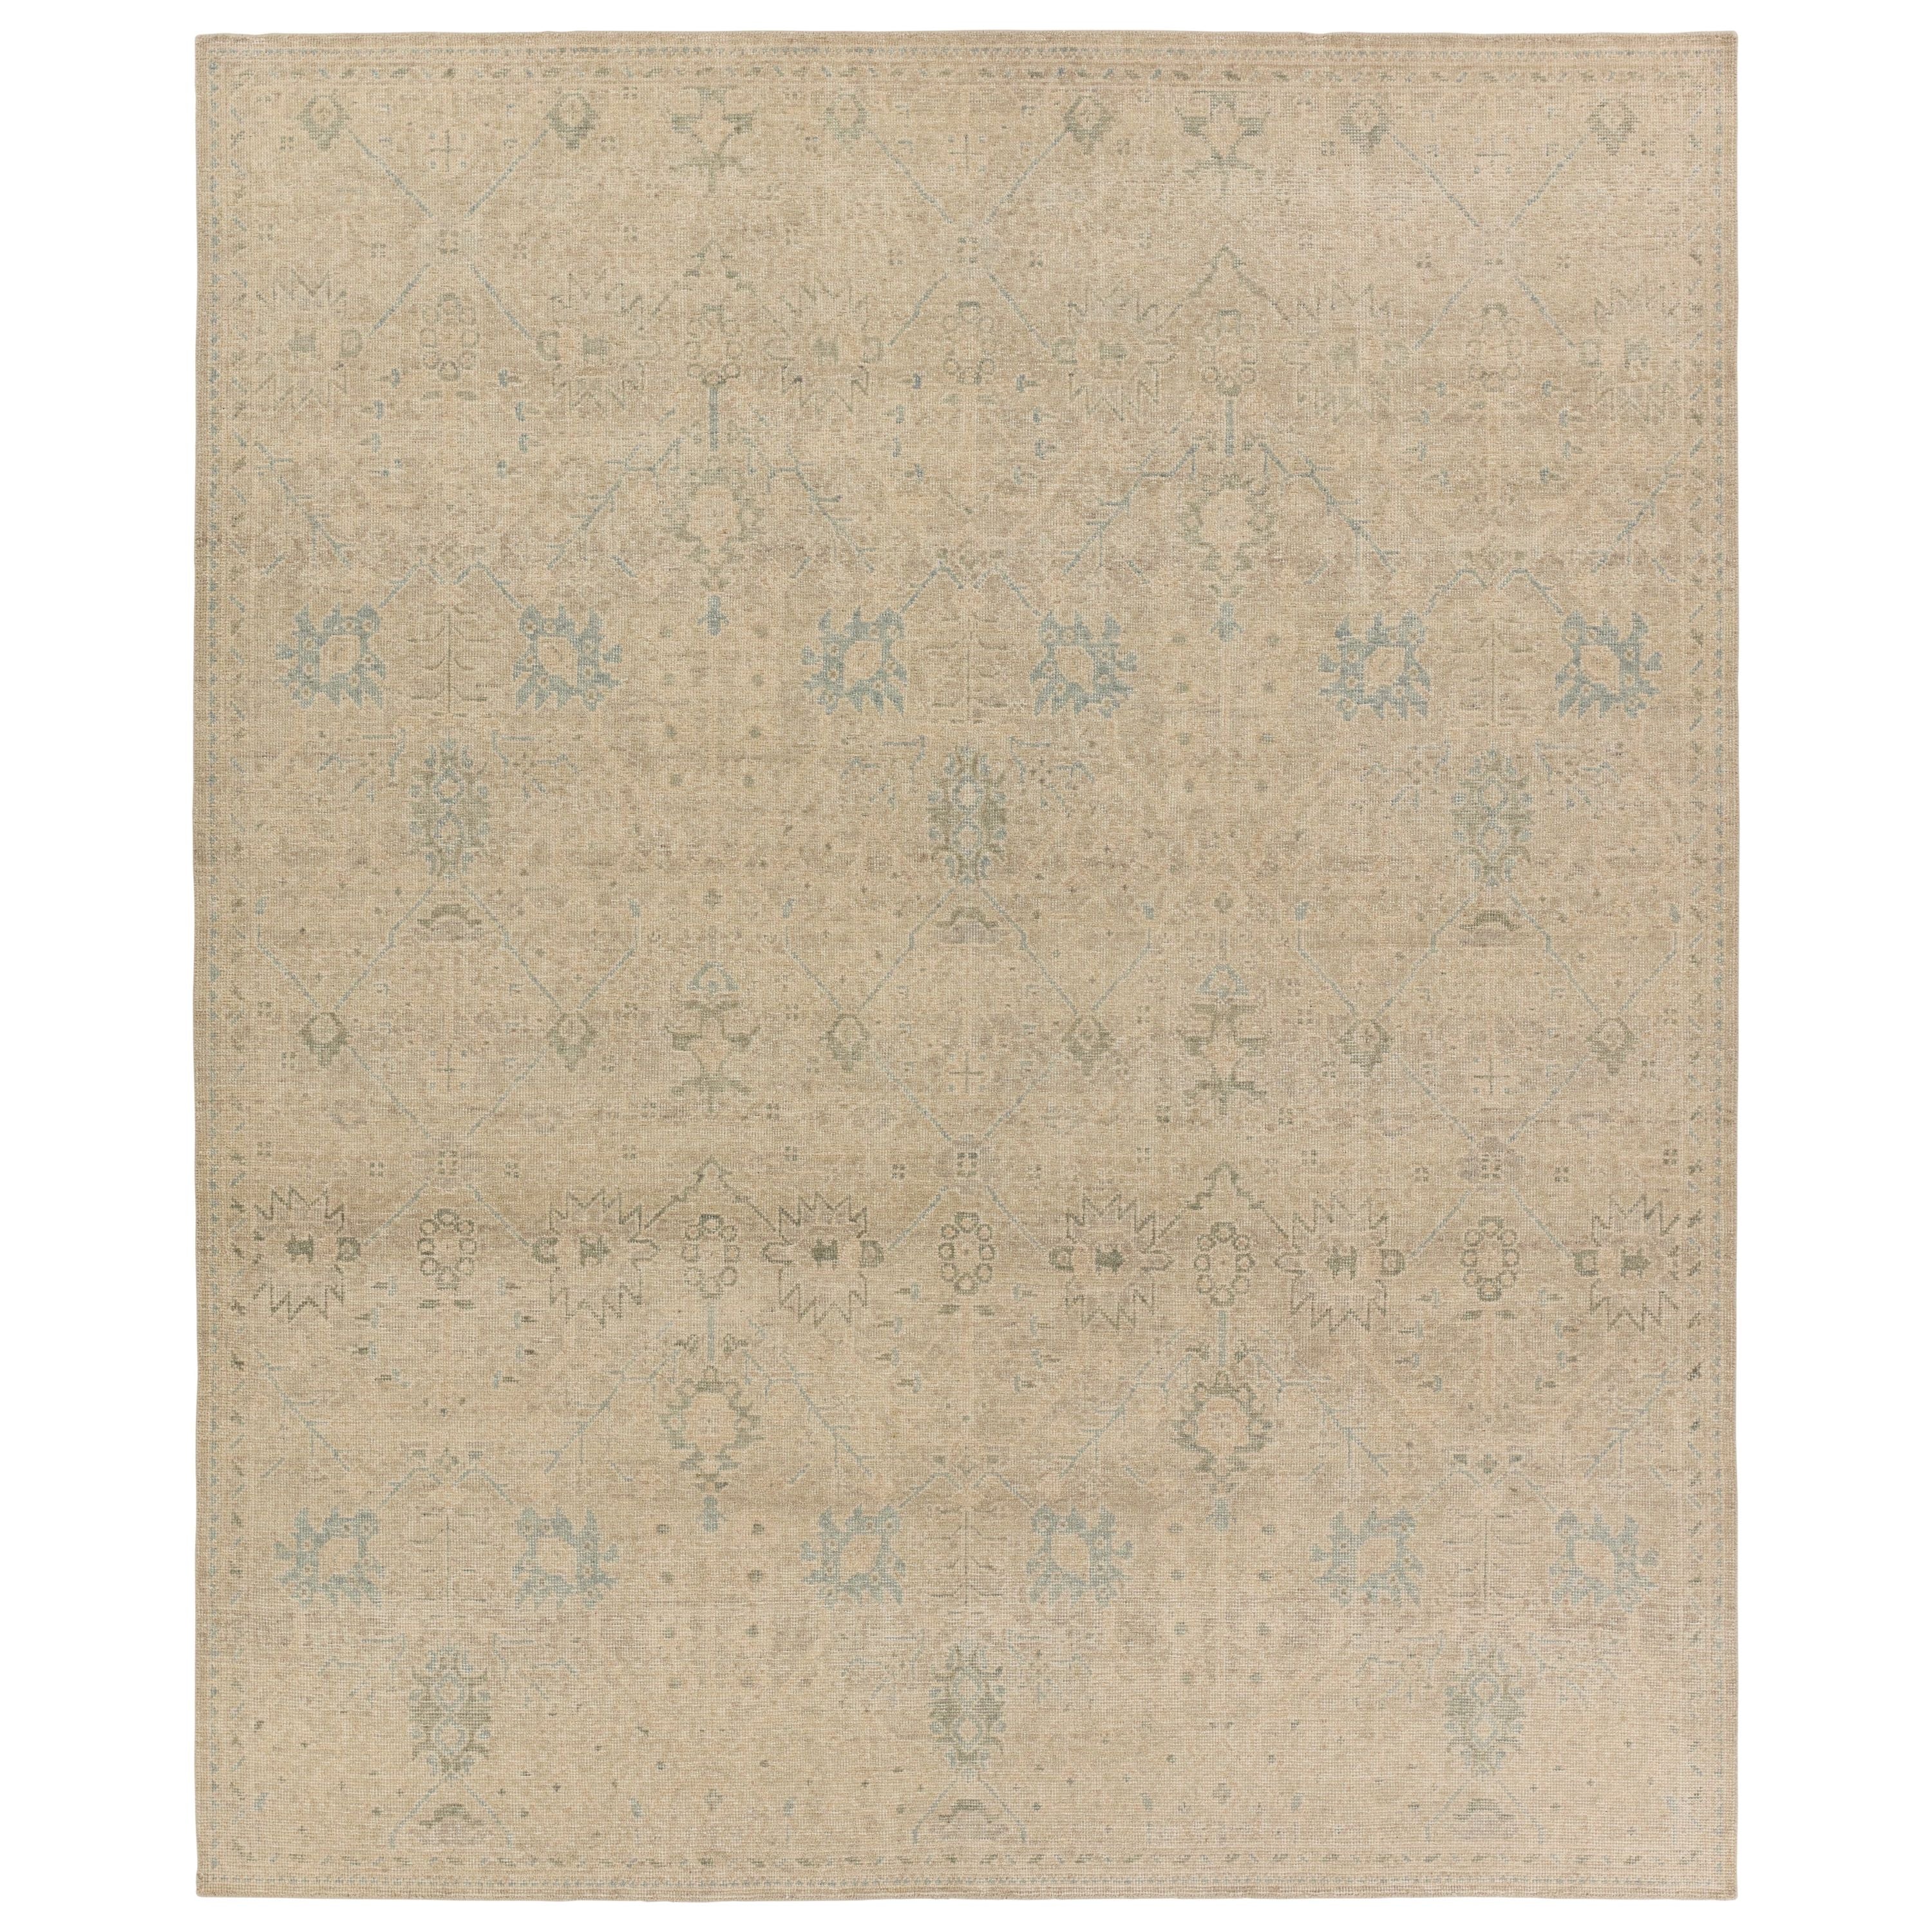 The Onessa collection marries traditional motifs with soft, subdued colorways for the perfect blend of fresh and time-honored style. These hand-knotted wool rugs feature a hand-sheared quality that lends the design a coveted vintage impression. The Joan rug features a distressed, floral Oushak pattern in hues of tan, blue, taupe, cream, and gray. Amethyst Home provides interior design, new construction, custom furniture, and area rugs in the Salt Lake City metro area.